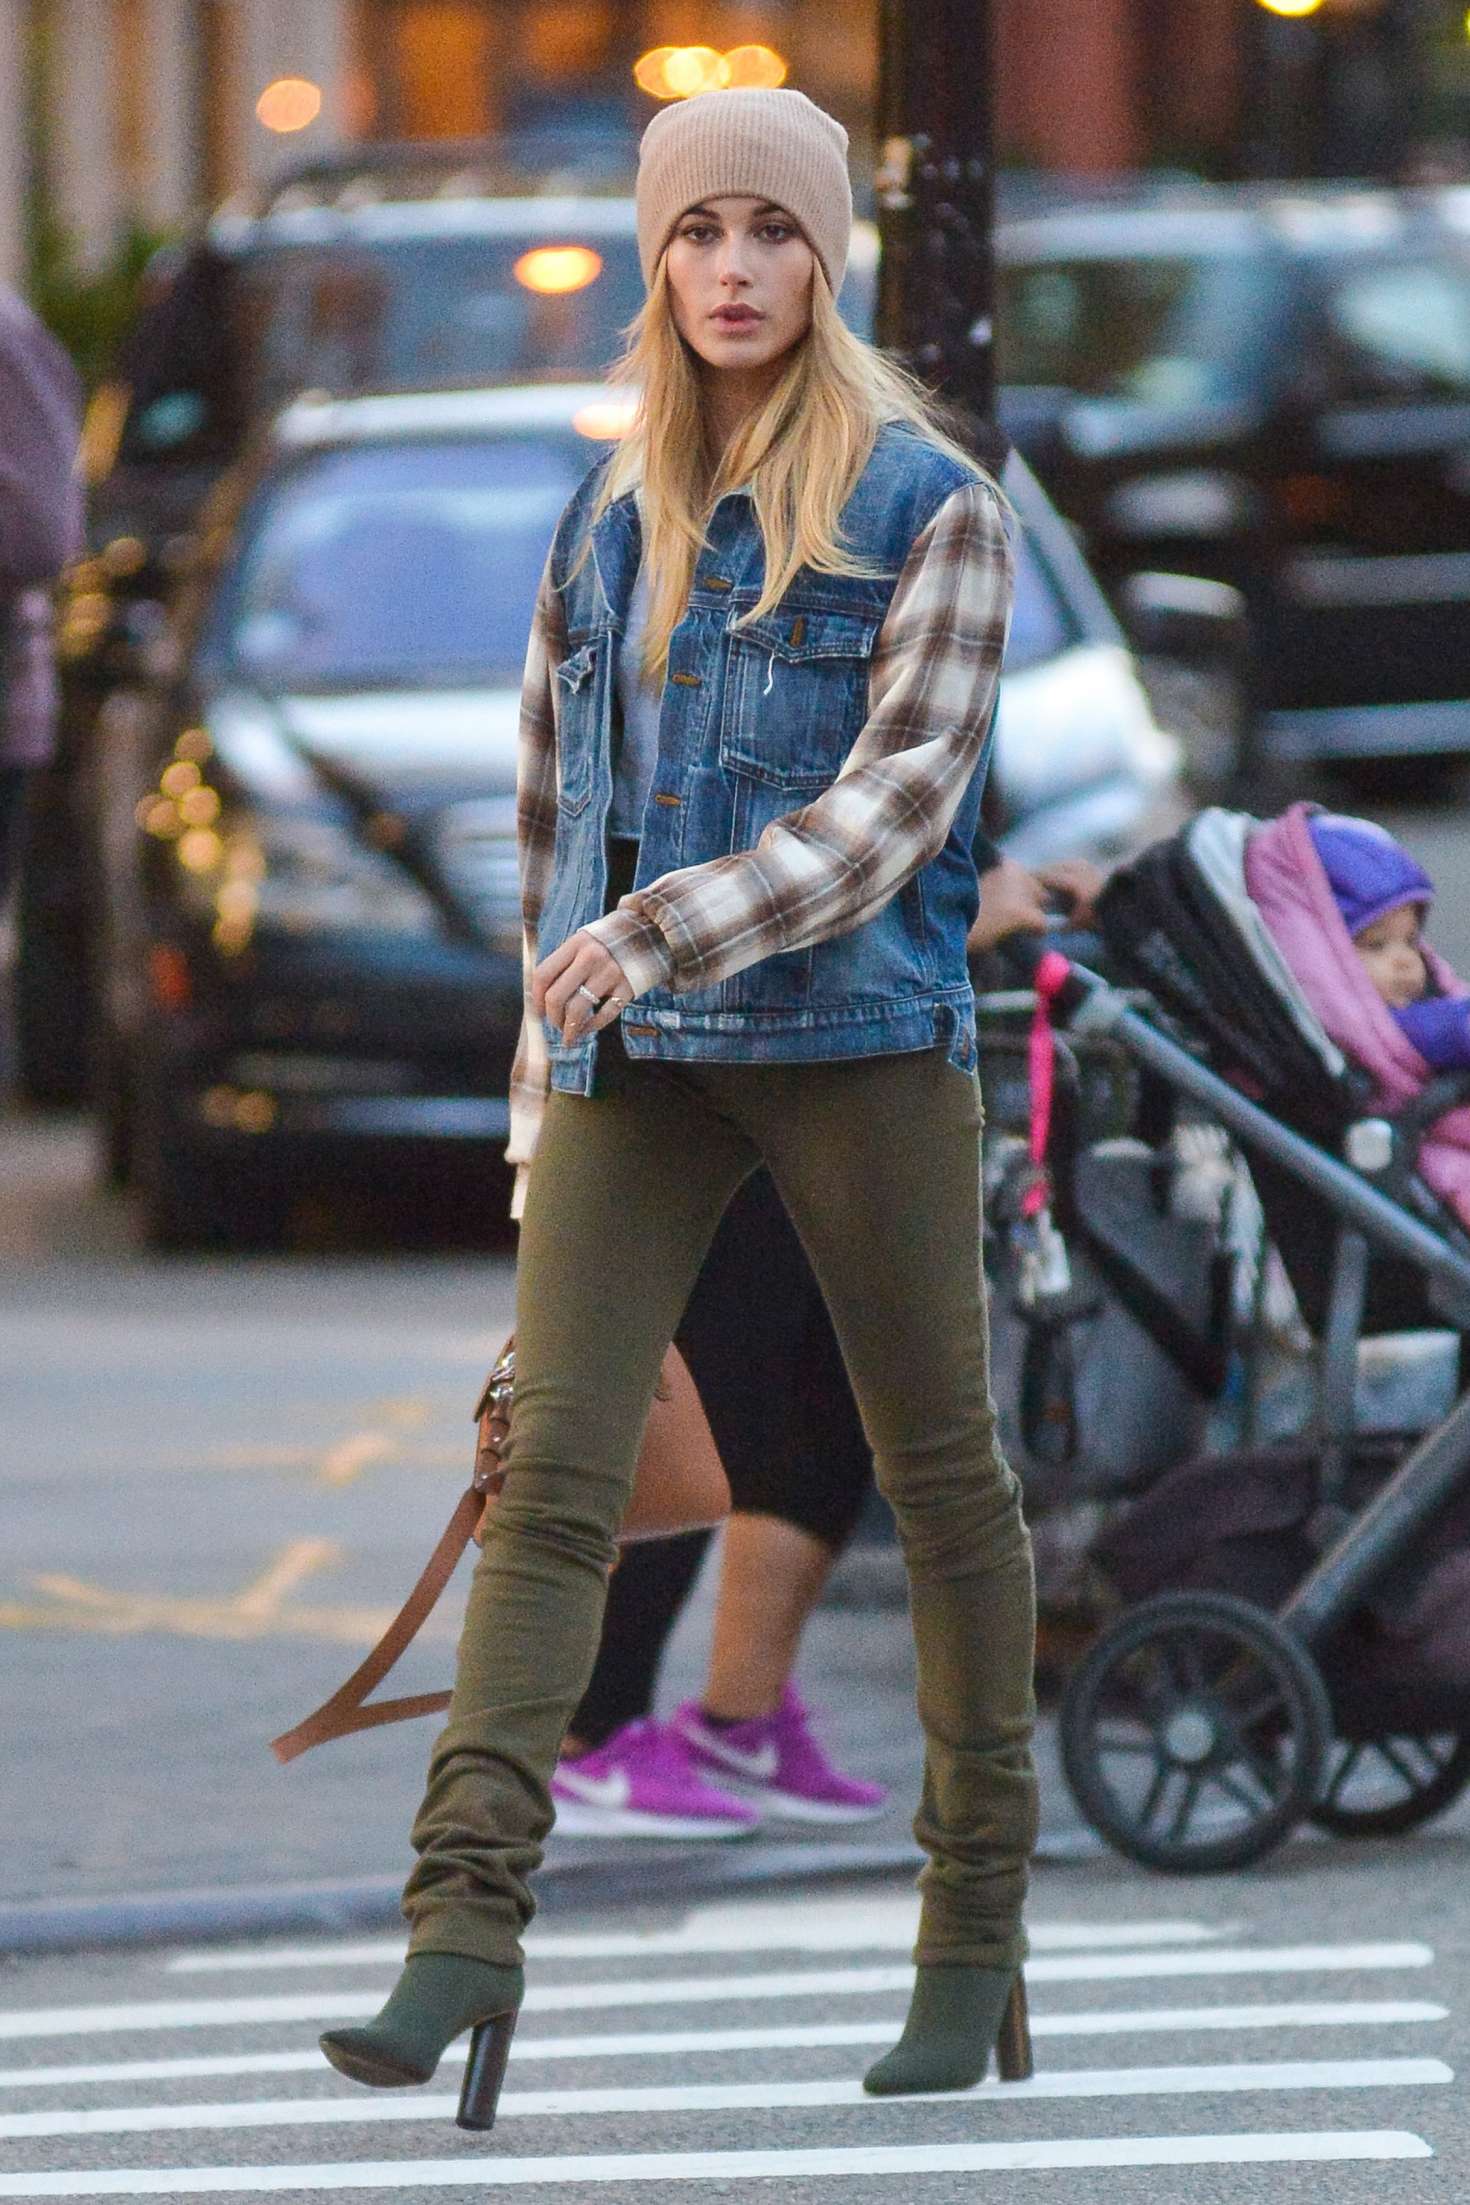 Hailey Baldwin in Tight Jeans Out in NYC | GotCeleb1470 x 2205